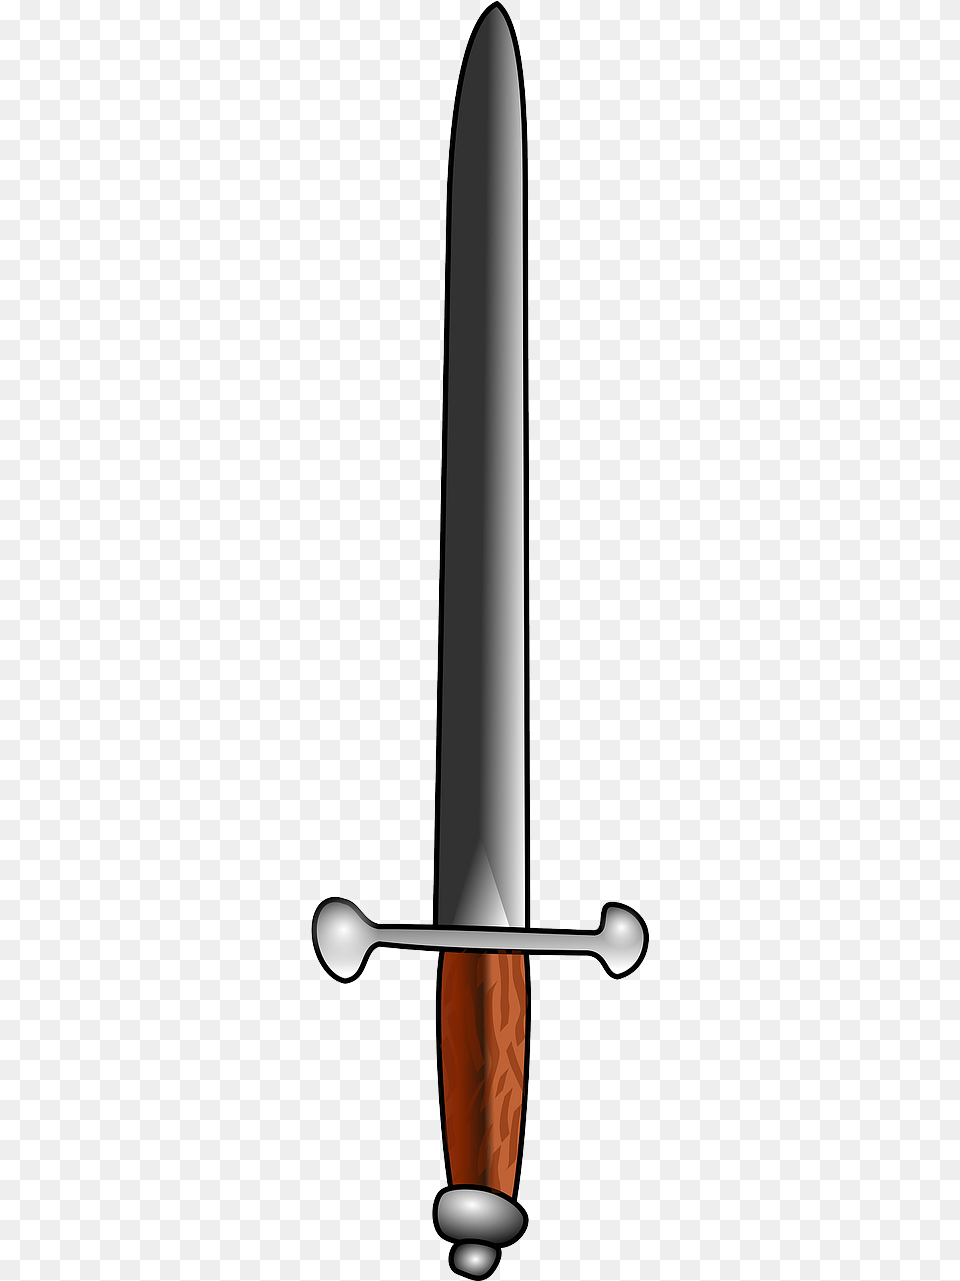 Sword Weapon Fencing Photo Sword, Blade, Dagger, Knife, Smoke Pipe Png Image